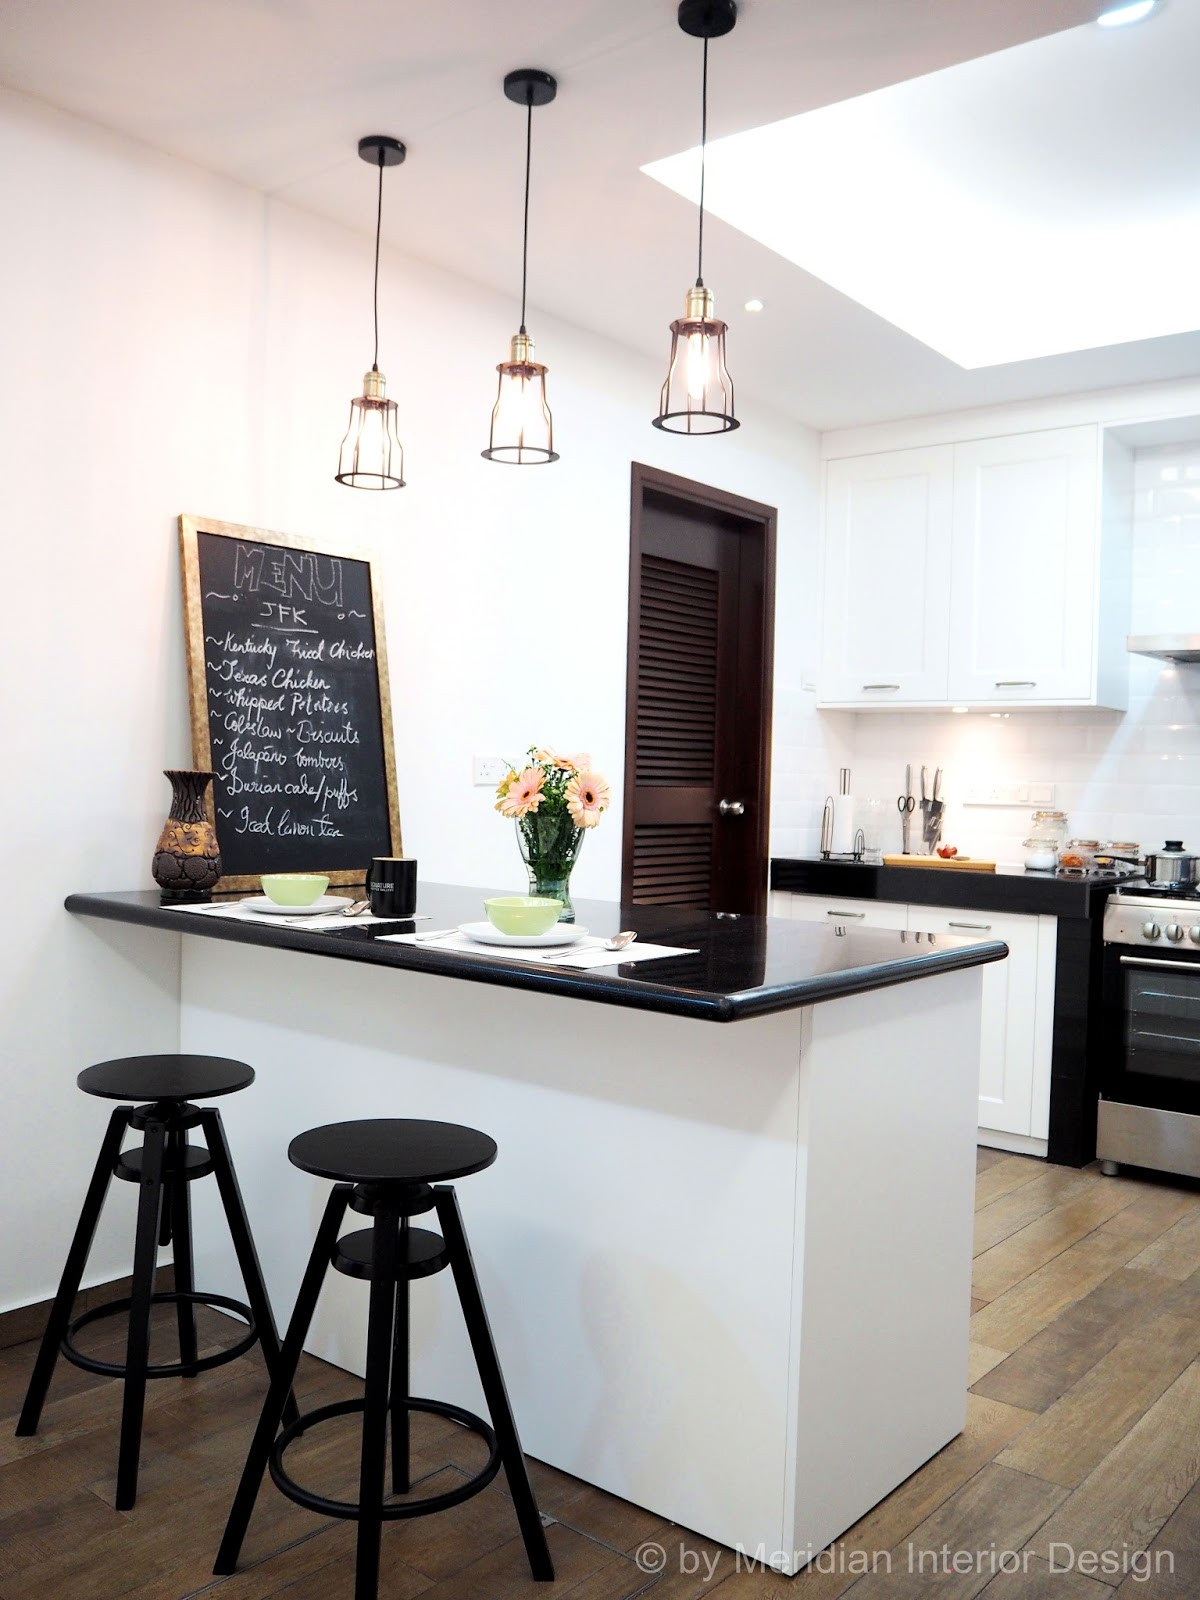 Kitchen Island Attached To Wall
 Meridian Interior Design and Kitchen Design in Kuala